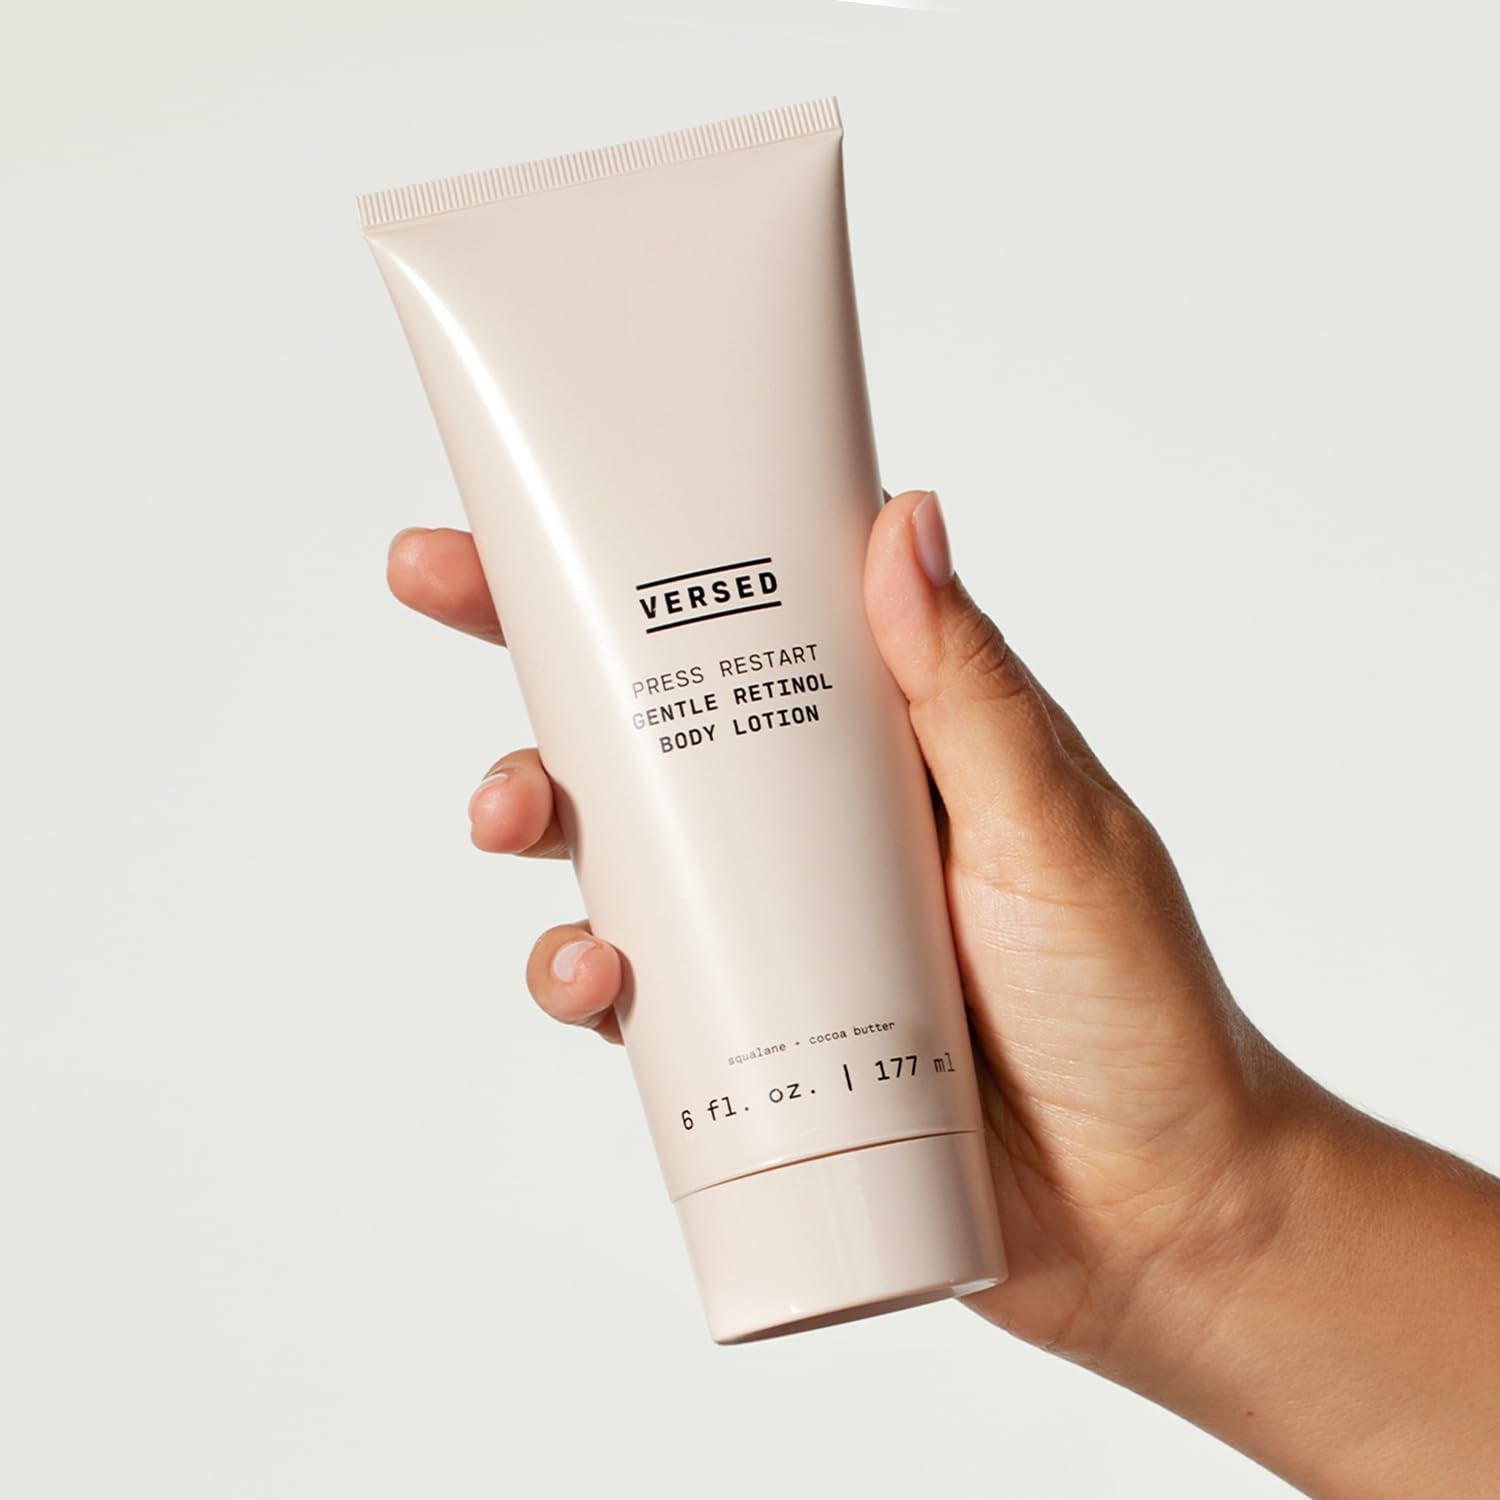 "Versed Press Restart Retinol Body Lotion: Firming Cocoa Butter + Squalane Moisturizer for Smooth, Bright Skin (6 Oz)"